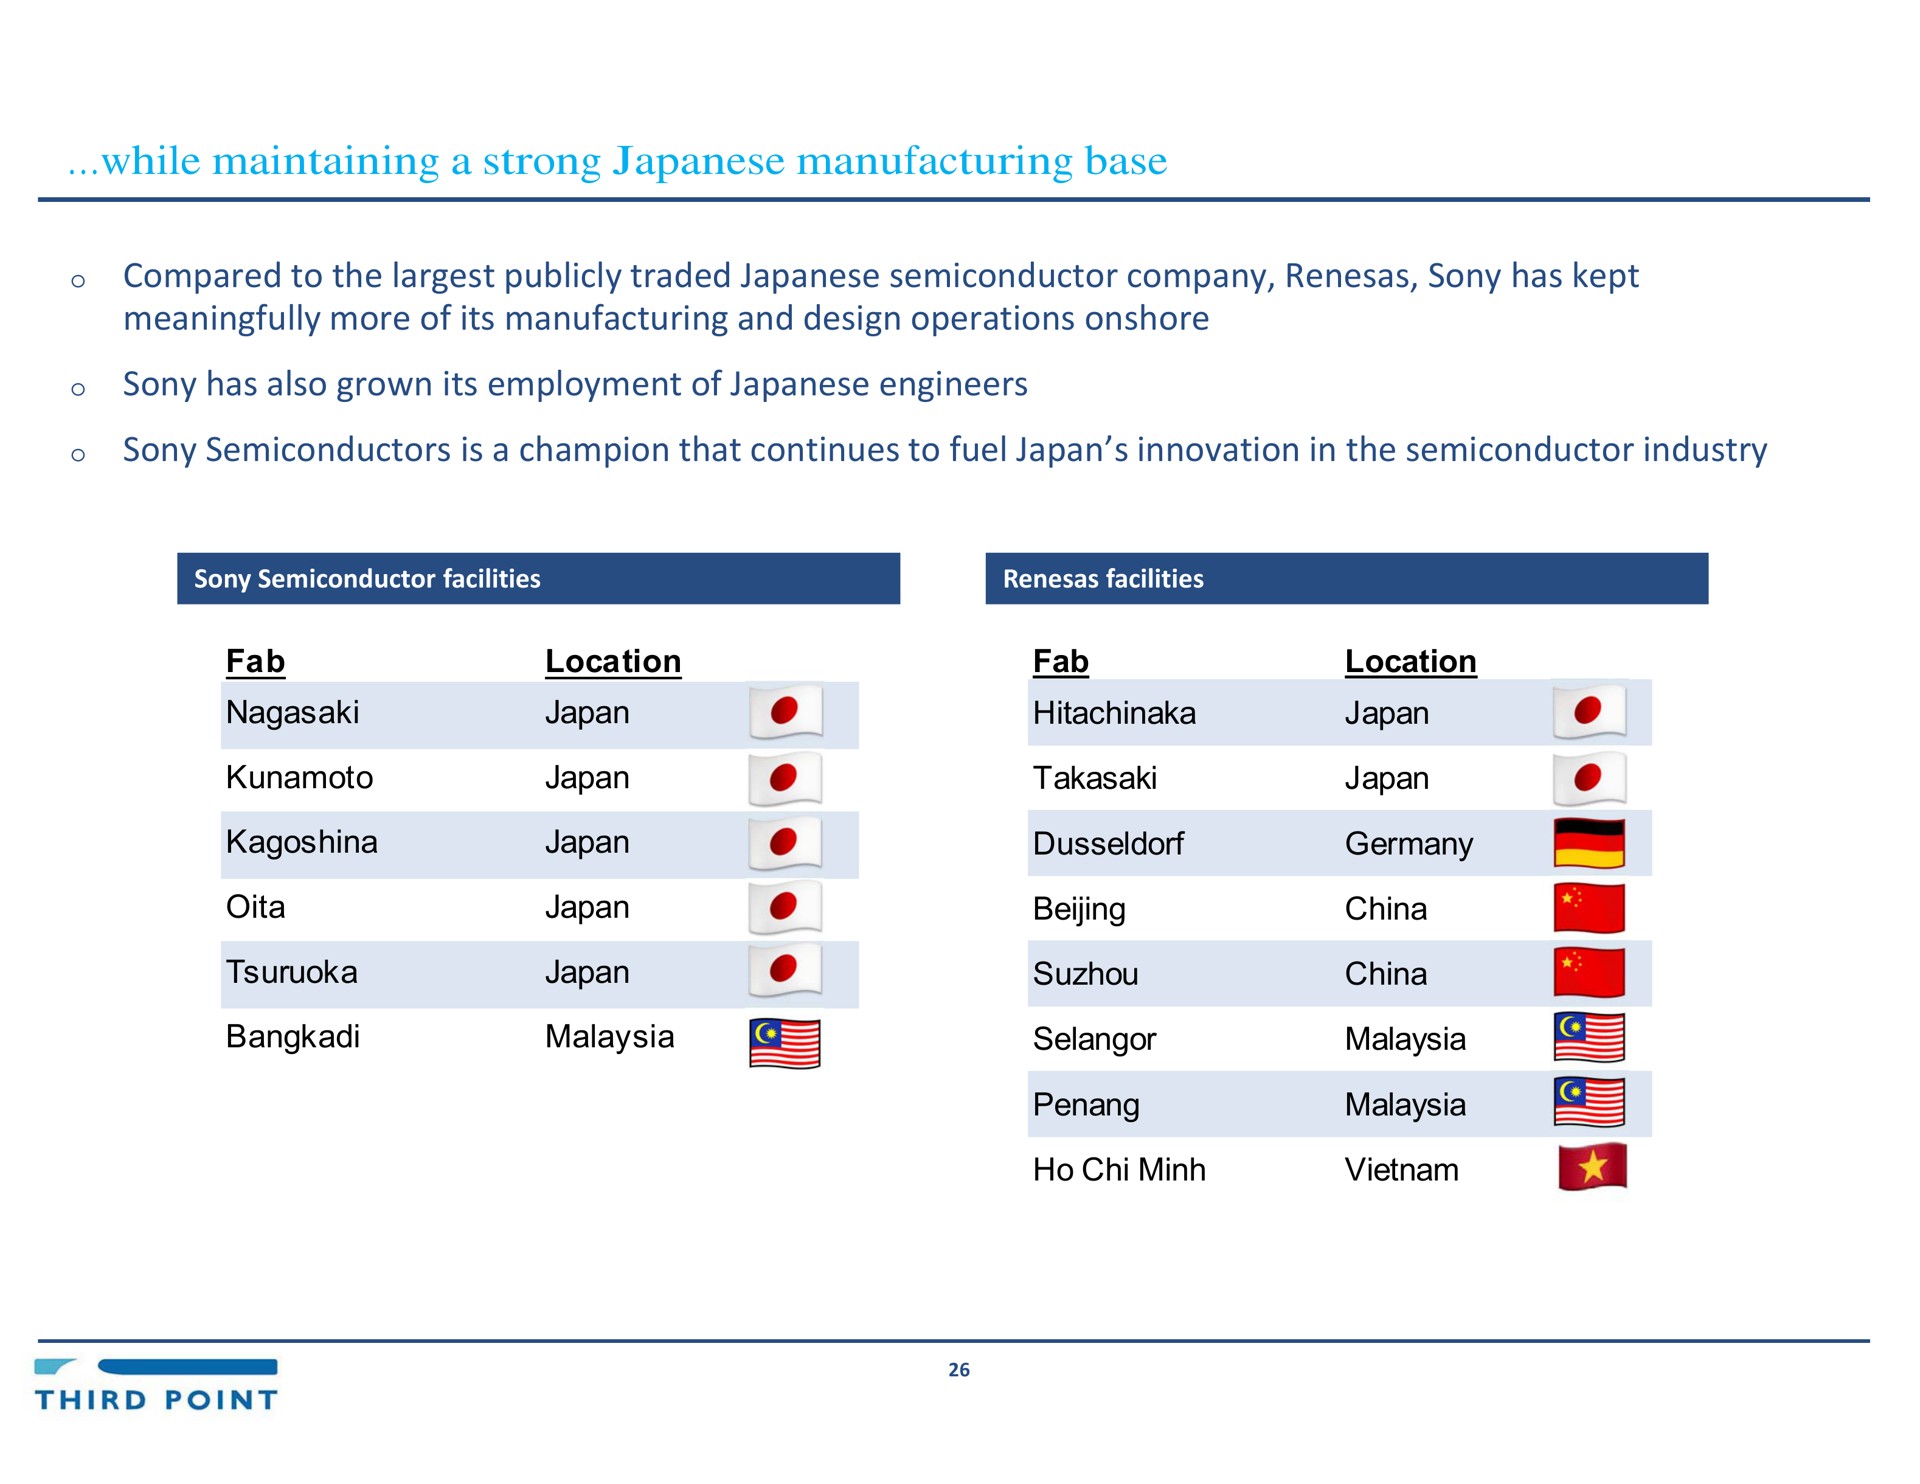 while maintaining a strong manufacturing base compared to the publicly traded semiconductor company has kept meaningfully more of its manufacturing and design operations onshore has also grown its employment of engineers semiconductors is a champion that continues to fuel japan innovation in the semiconductor industry location location china china chi | Third Point Management